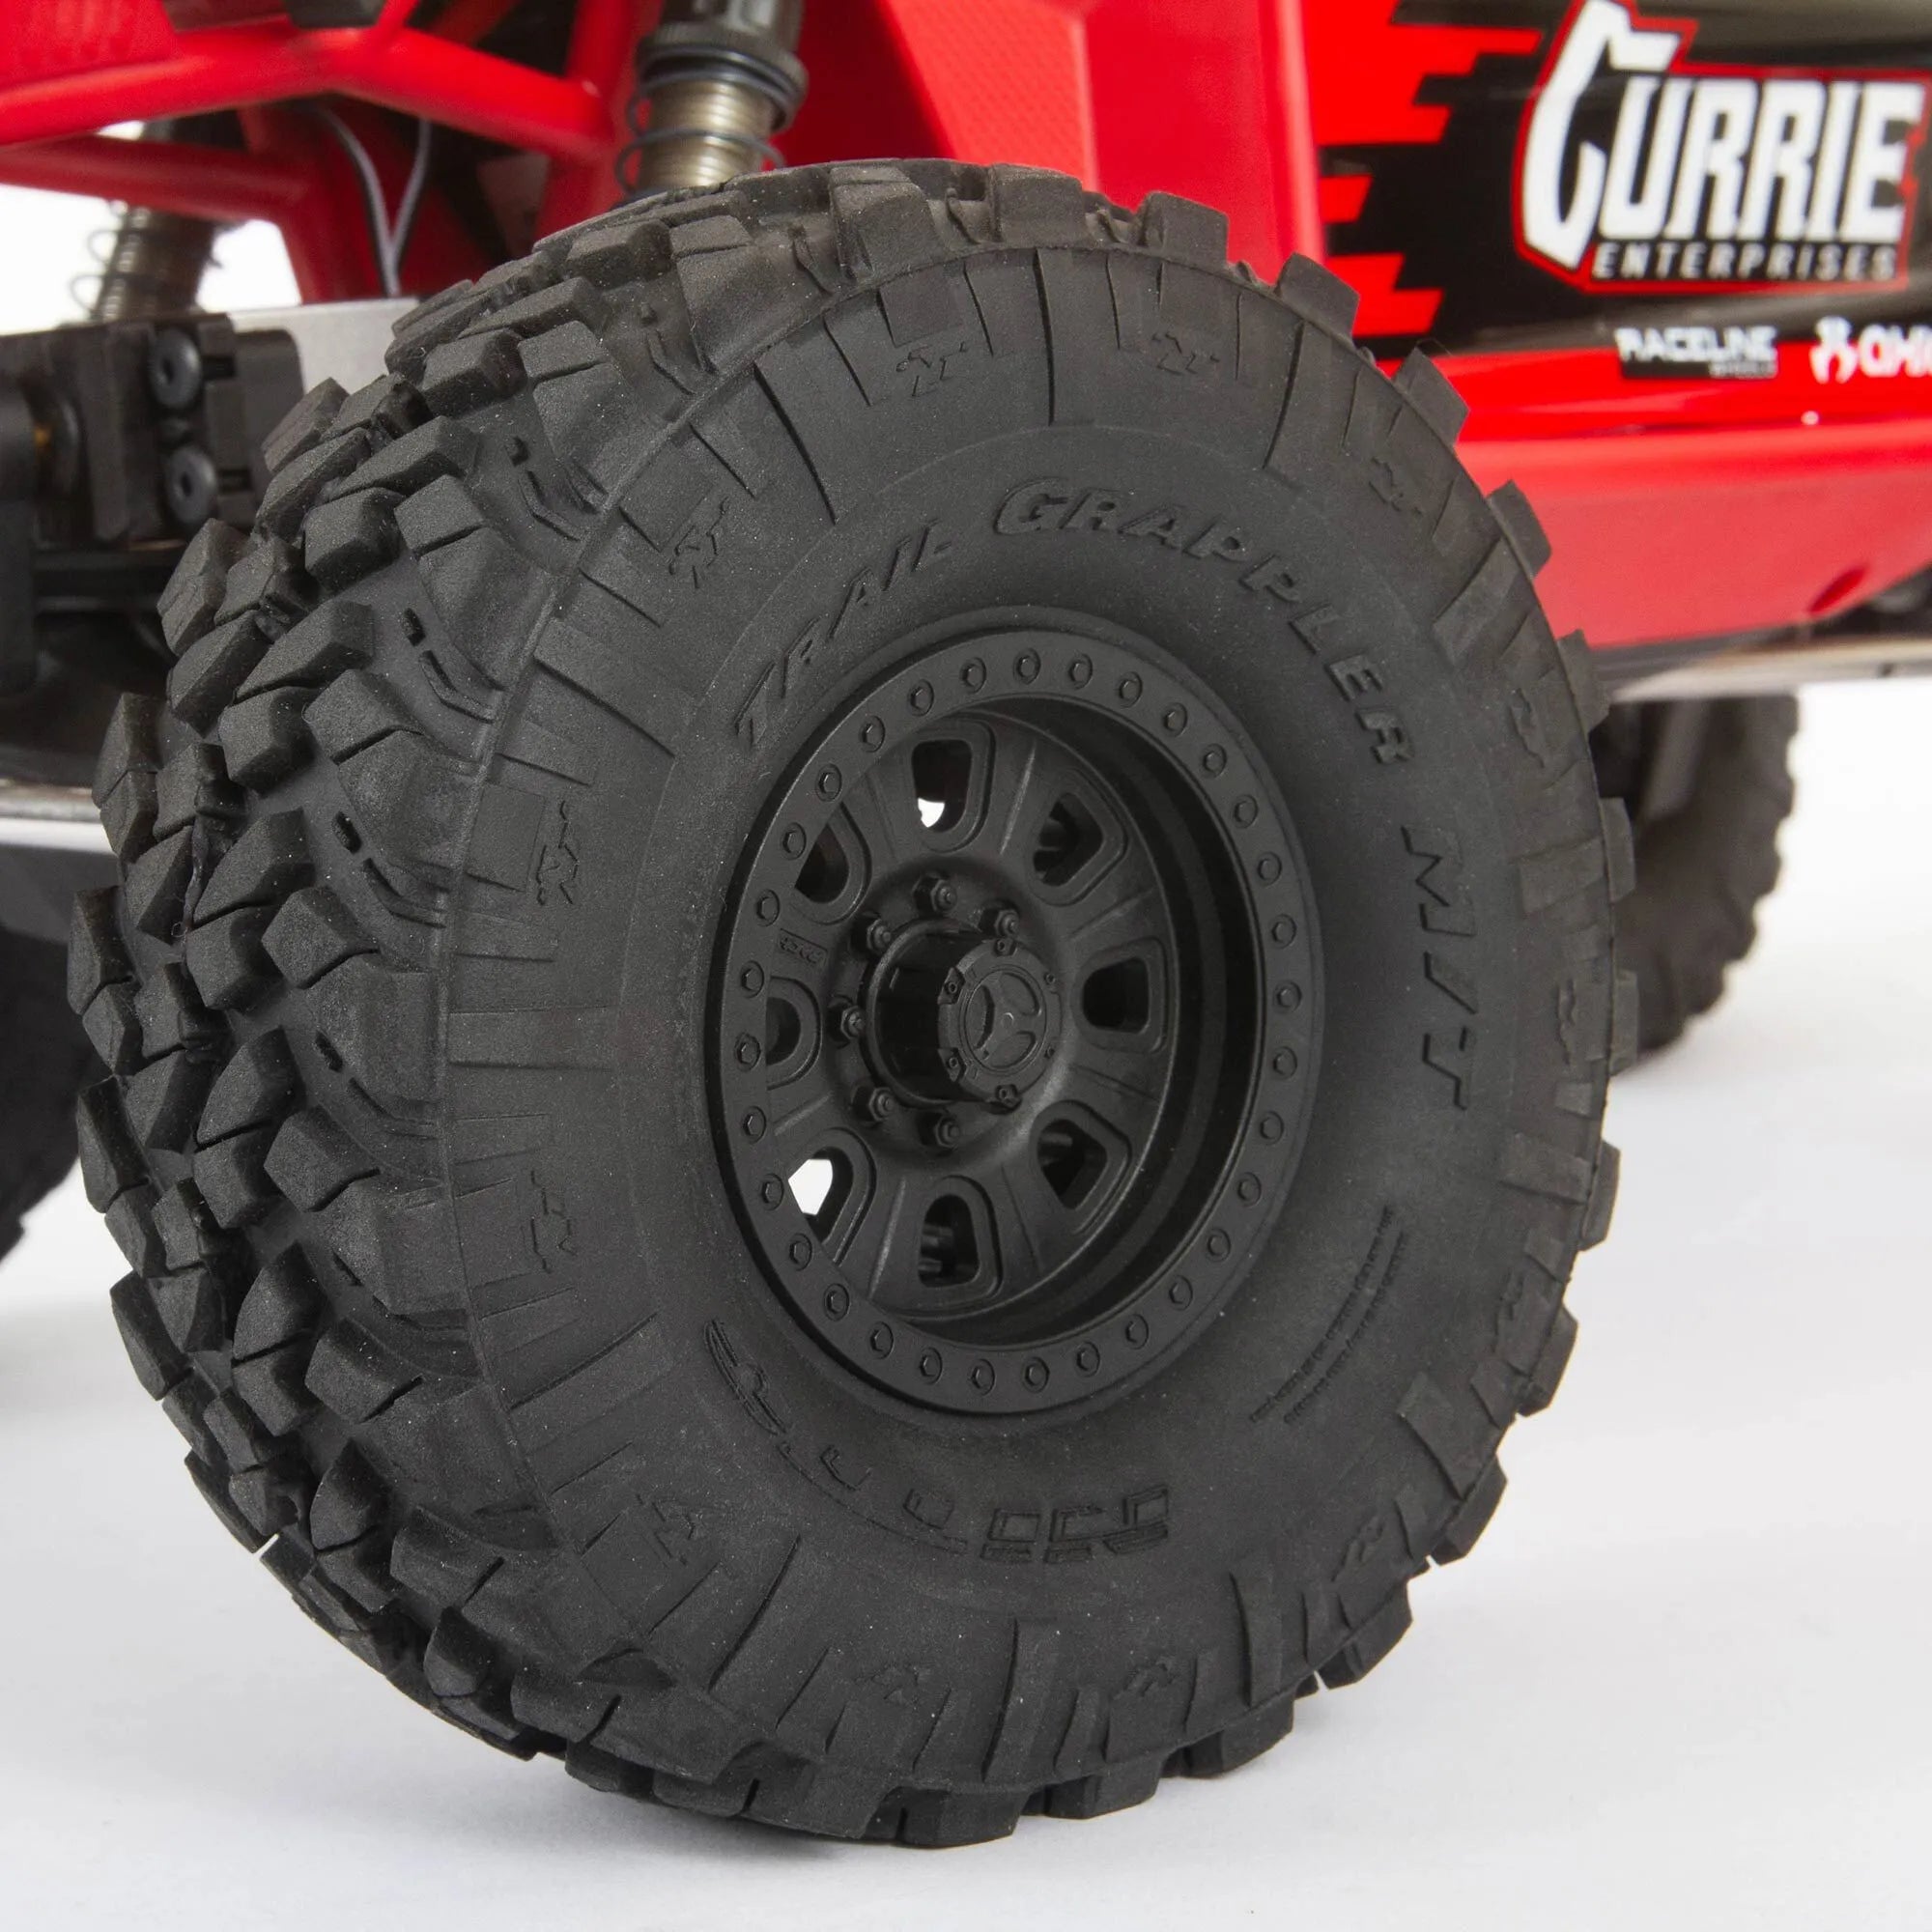 Axial Capra 1.9 4WS Nitto Unlimited Trail Buggy RTR, AXI03022BT2 - Techtonic Hobbies - Axial